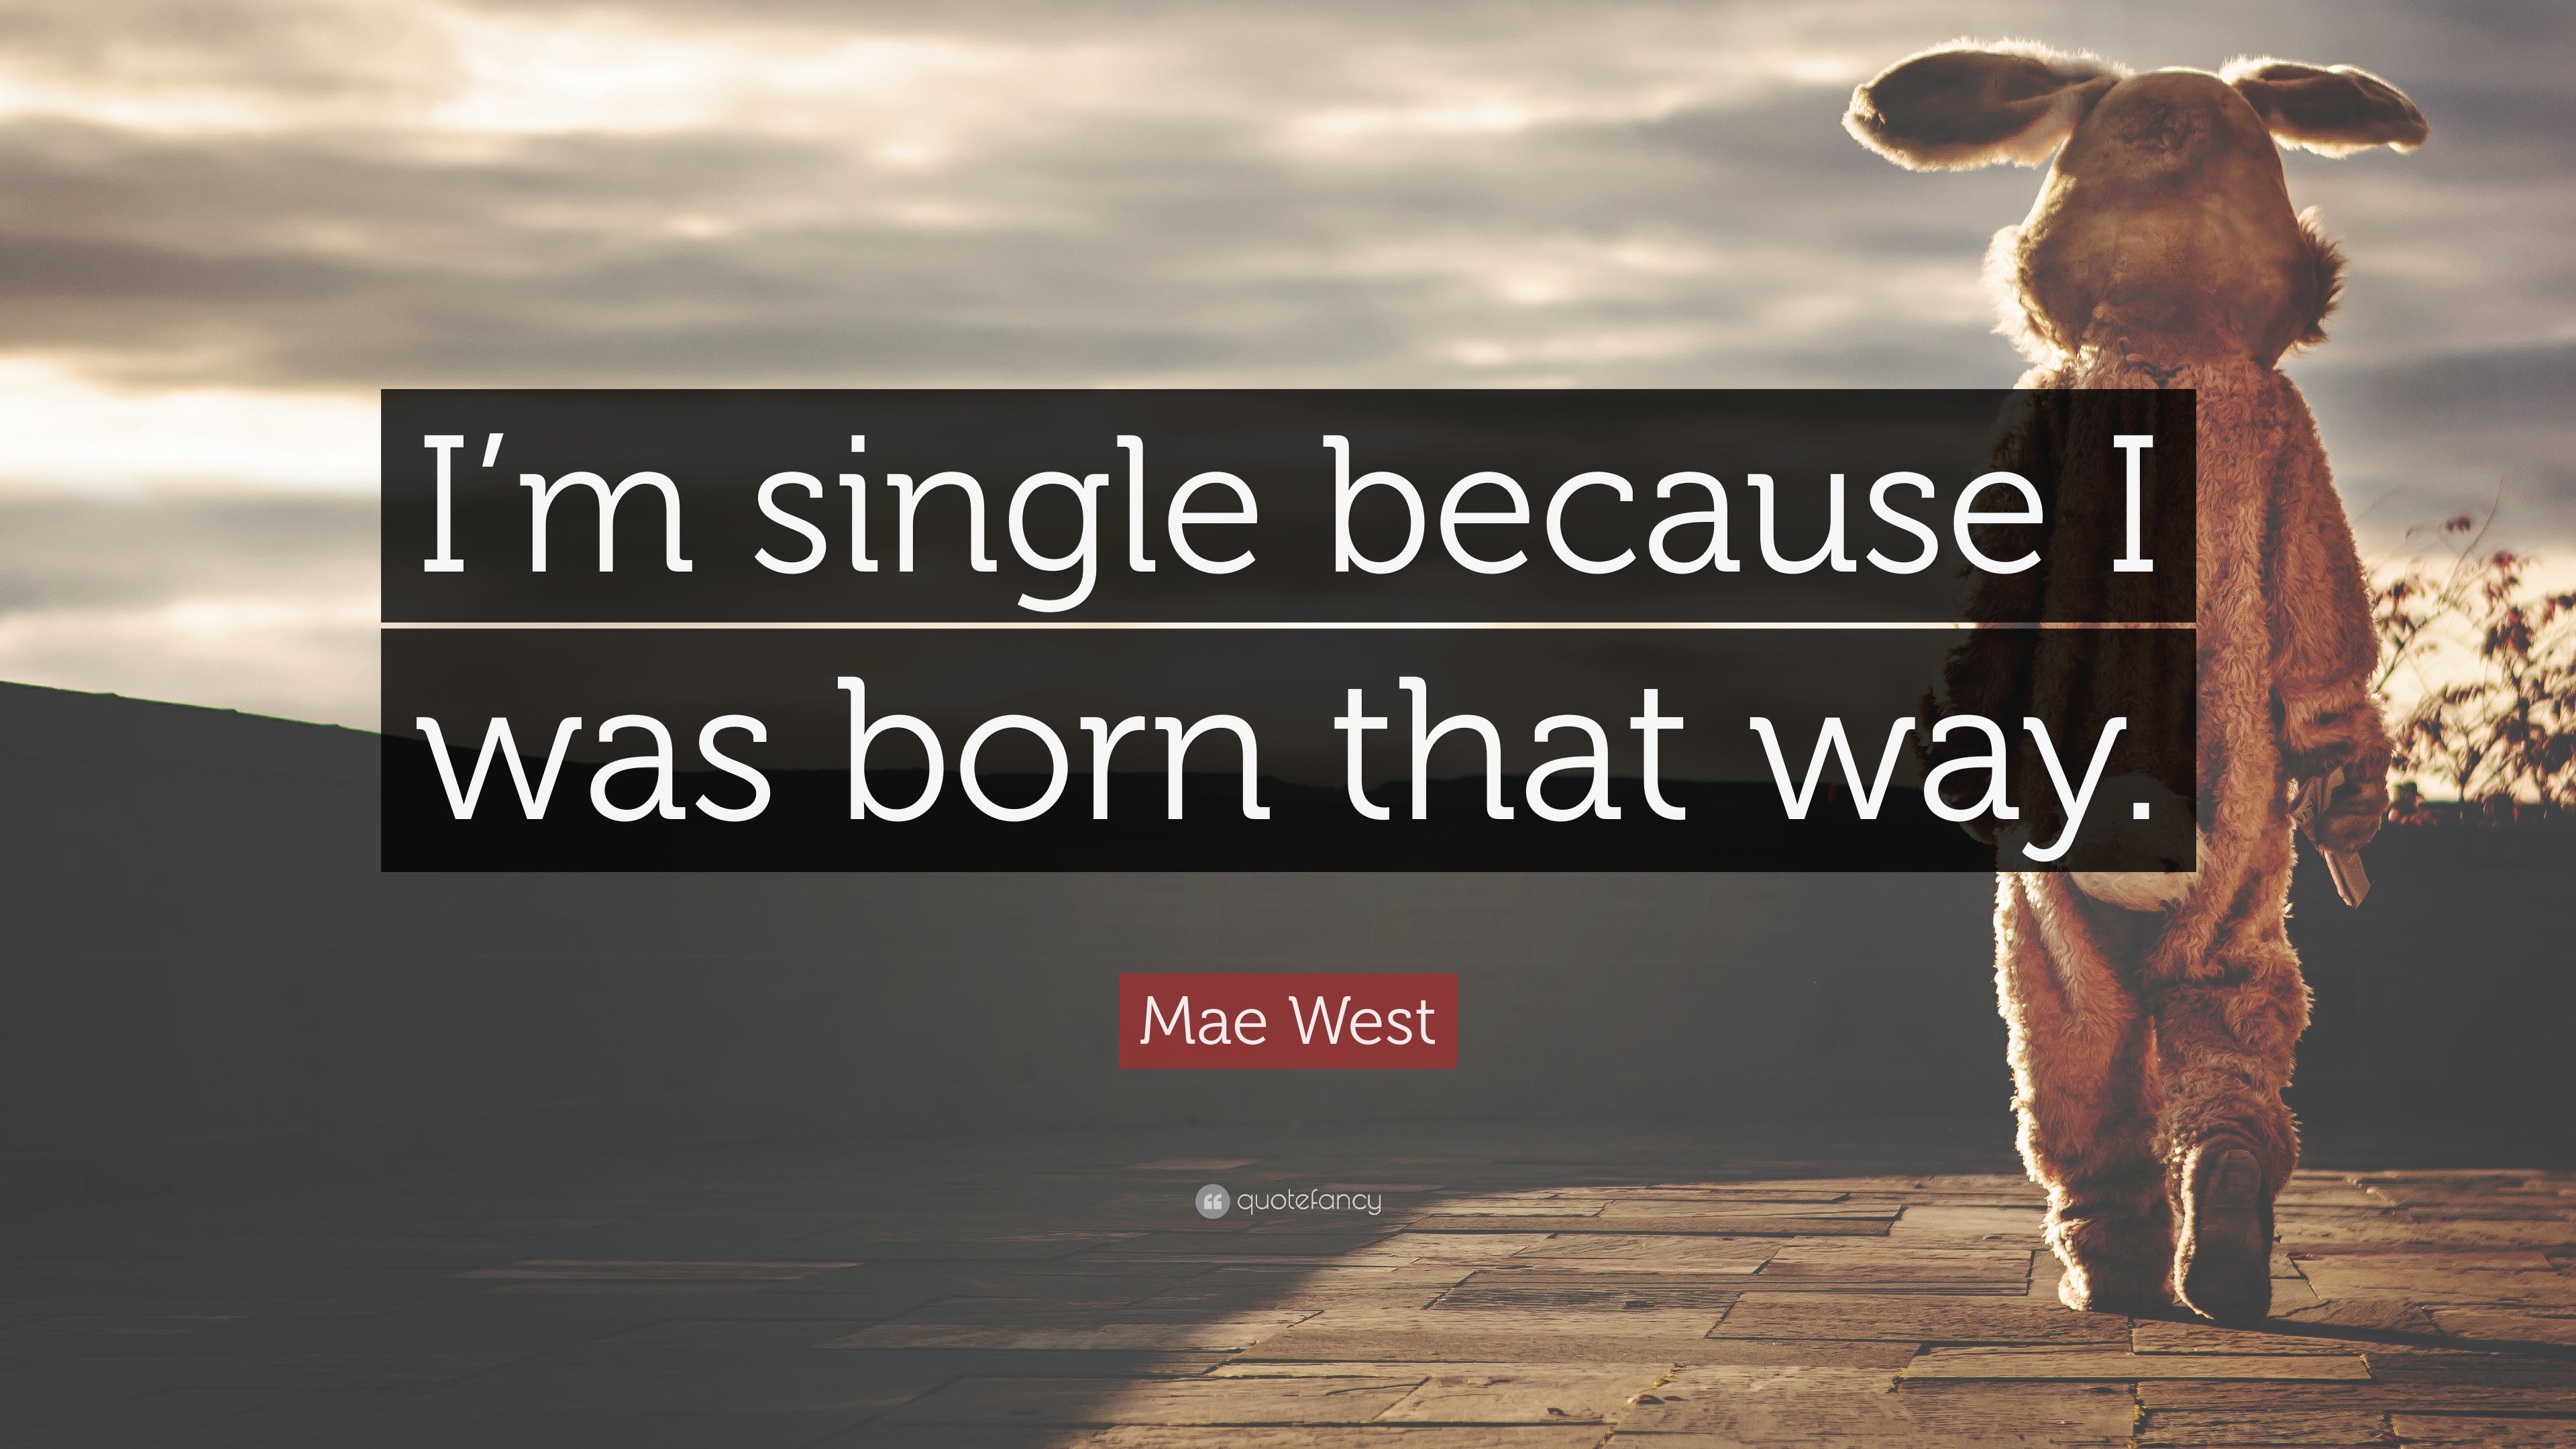 Mae West Quote: “I'm single because I was born that way.” (16 wallpaper)